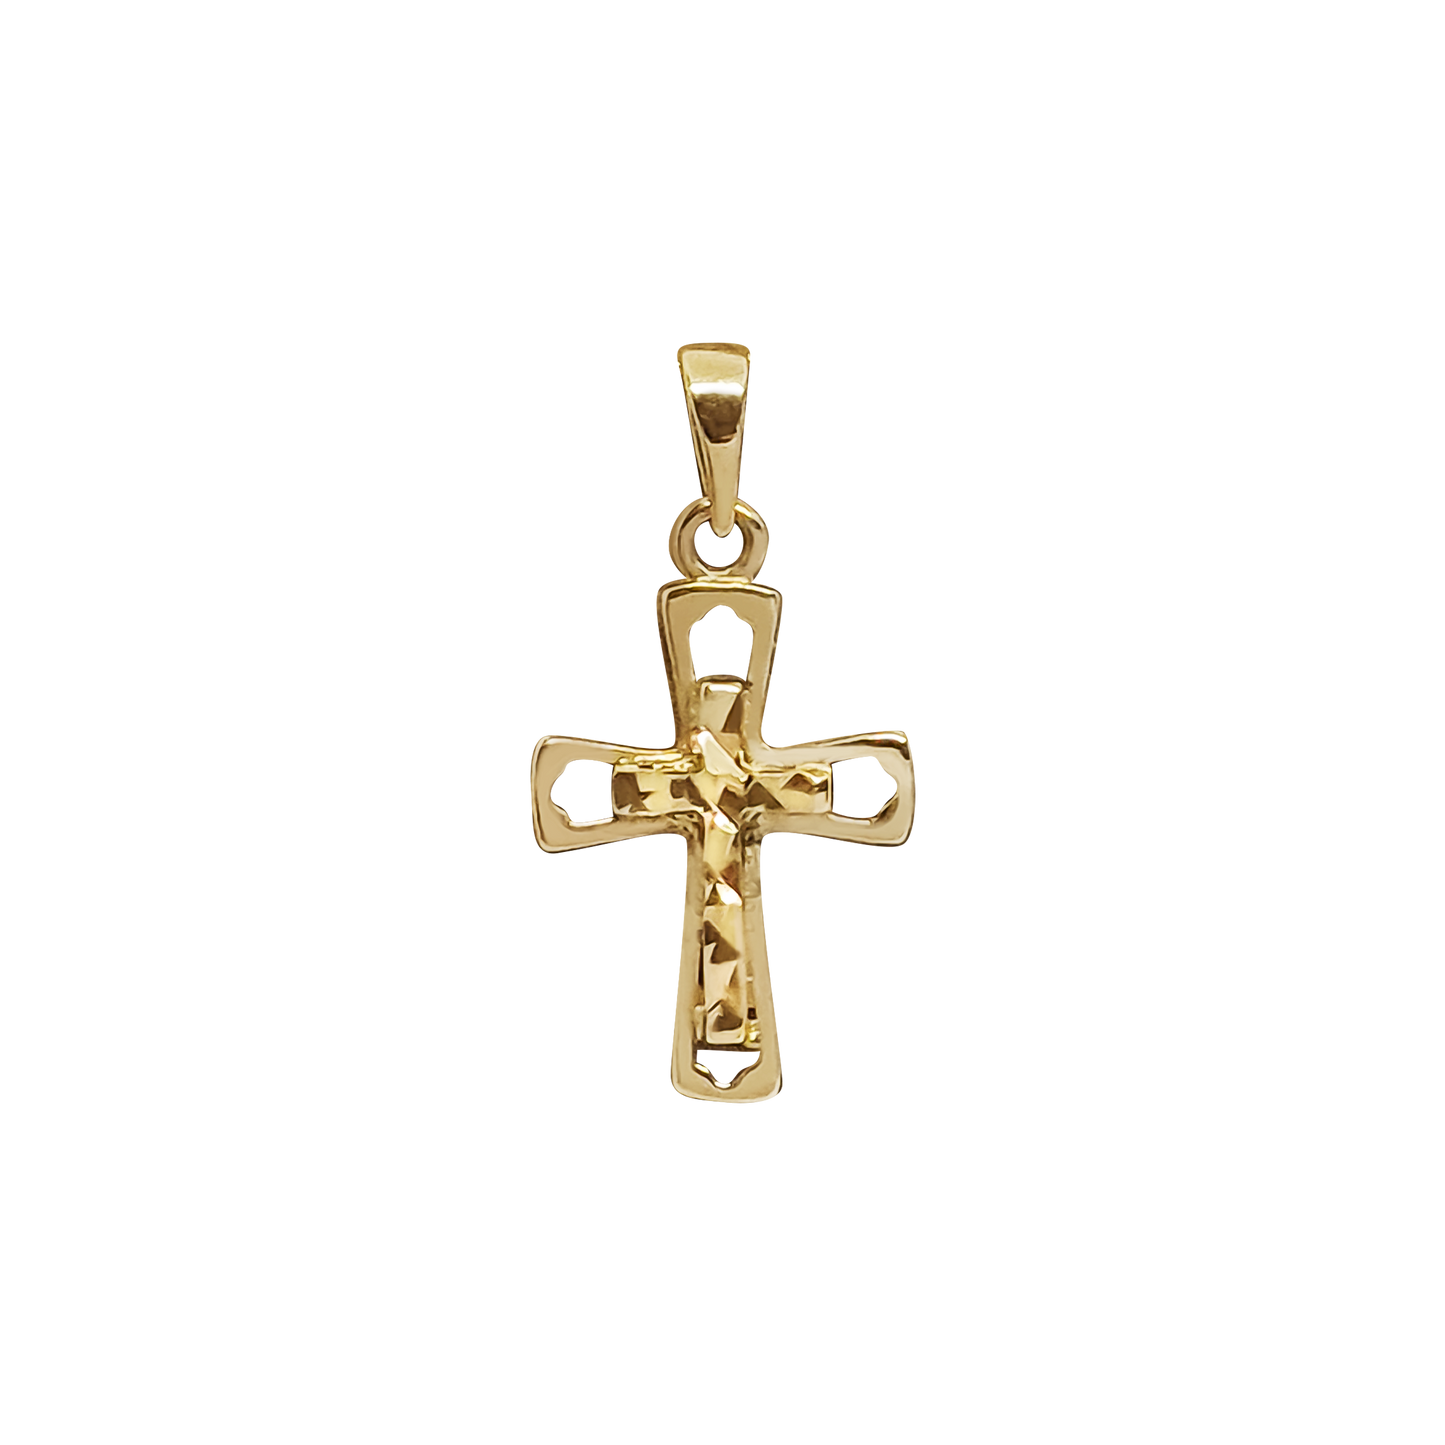 150mm Puzzled Cross Pendant in 9ct Yellow Gold.